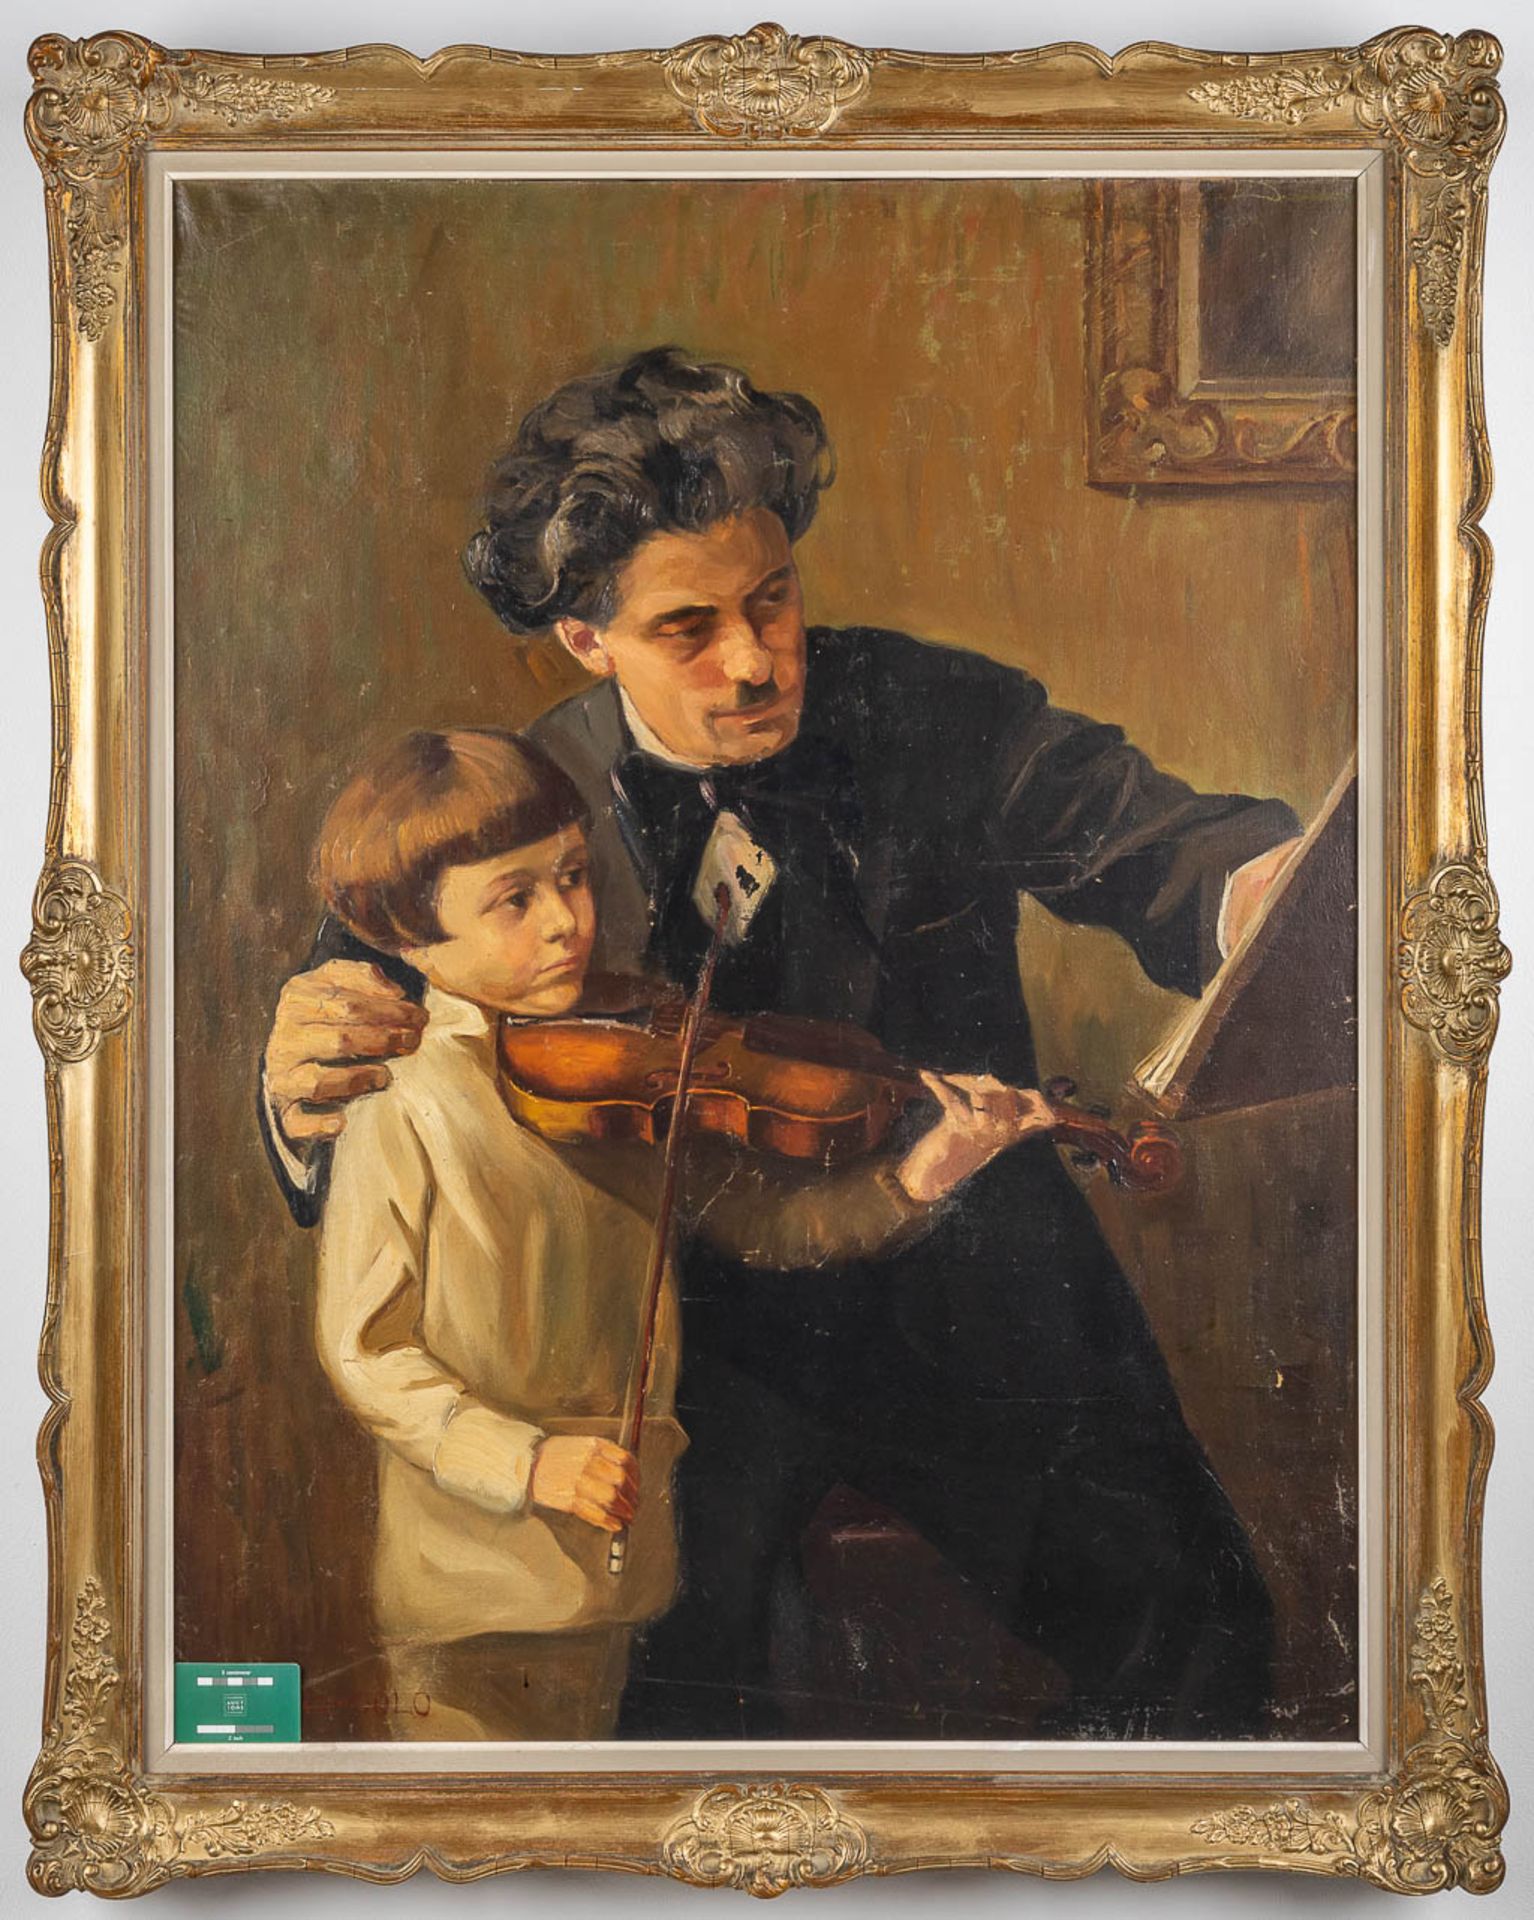 The Violin Player, a painting, oil on canvas. Signed Xanthopoulo. (W: 80 x H: 105 cm) - Image 2 of 12